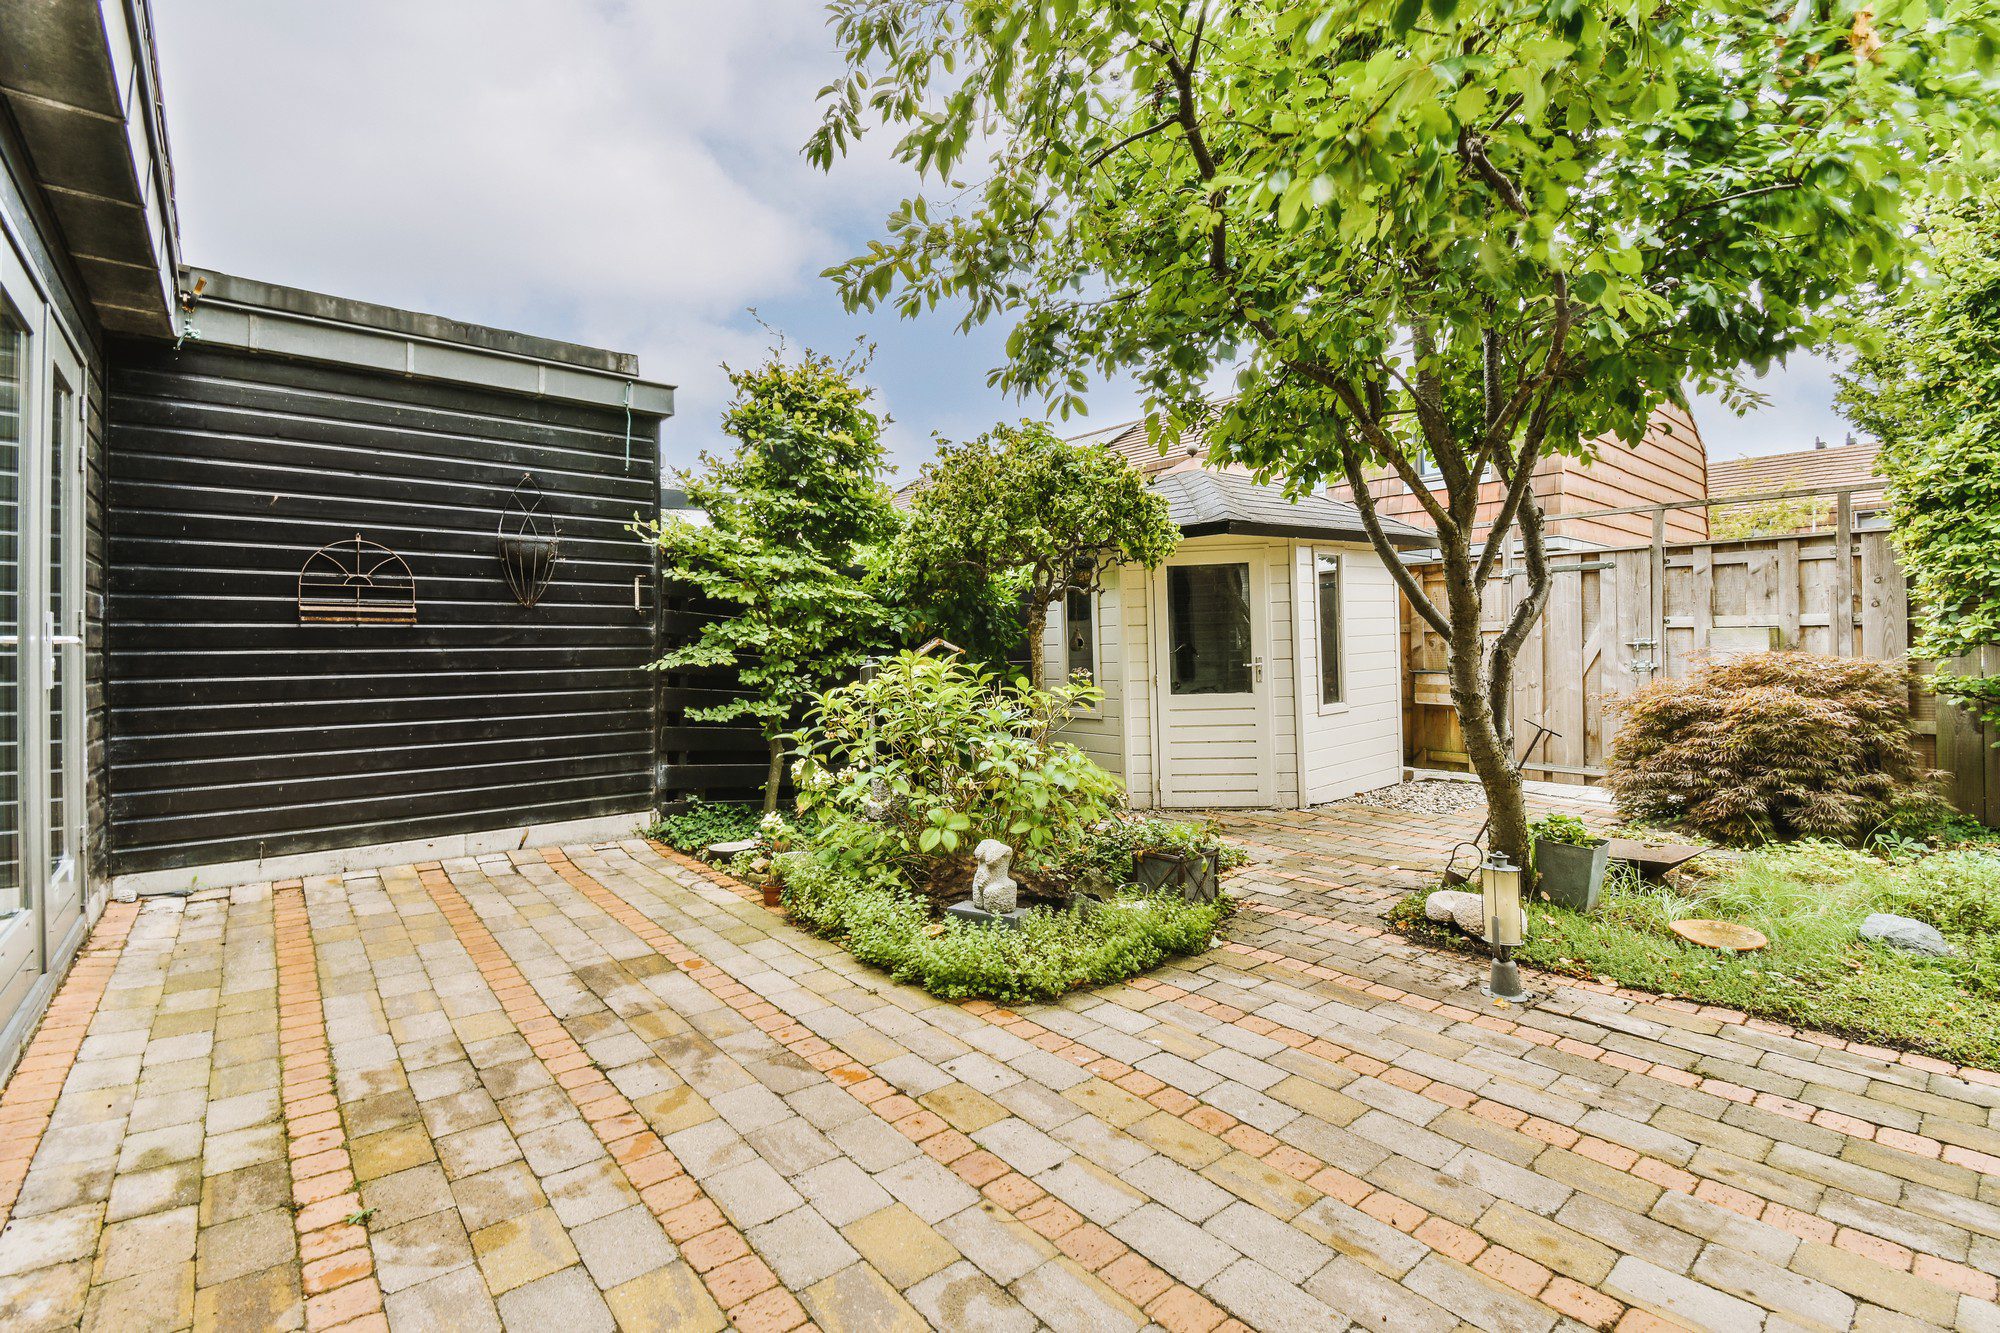 This image shows a cosy backyard with a brick paving area. On the left side, there is a modern building with a black, vertically-slatted wall featuring two different decorative wall hangings. In the centre, there's a small shed or outbuilding painted in white with a door and two windows. Surrounding the brick paving area, there are planted areas with a variety of greenery, including bushes, small trees, and ground covers, making the space look lush and inviting. No people are visible in the image, giving the appearance of a tranquil and private outdoor space. There are some garden ornaments, like a small bird bath and a garden statue nestled among the plants. The backdrop includes a wooden fence that encloses the yard, contributing to the area's secluded feel.